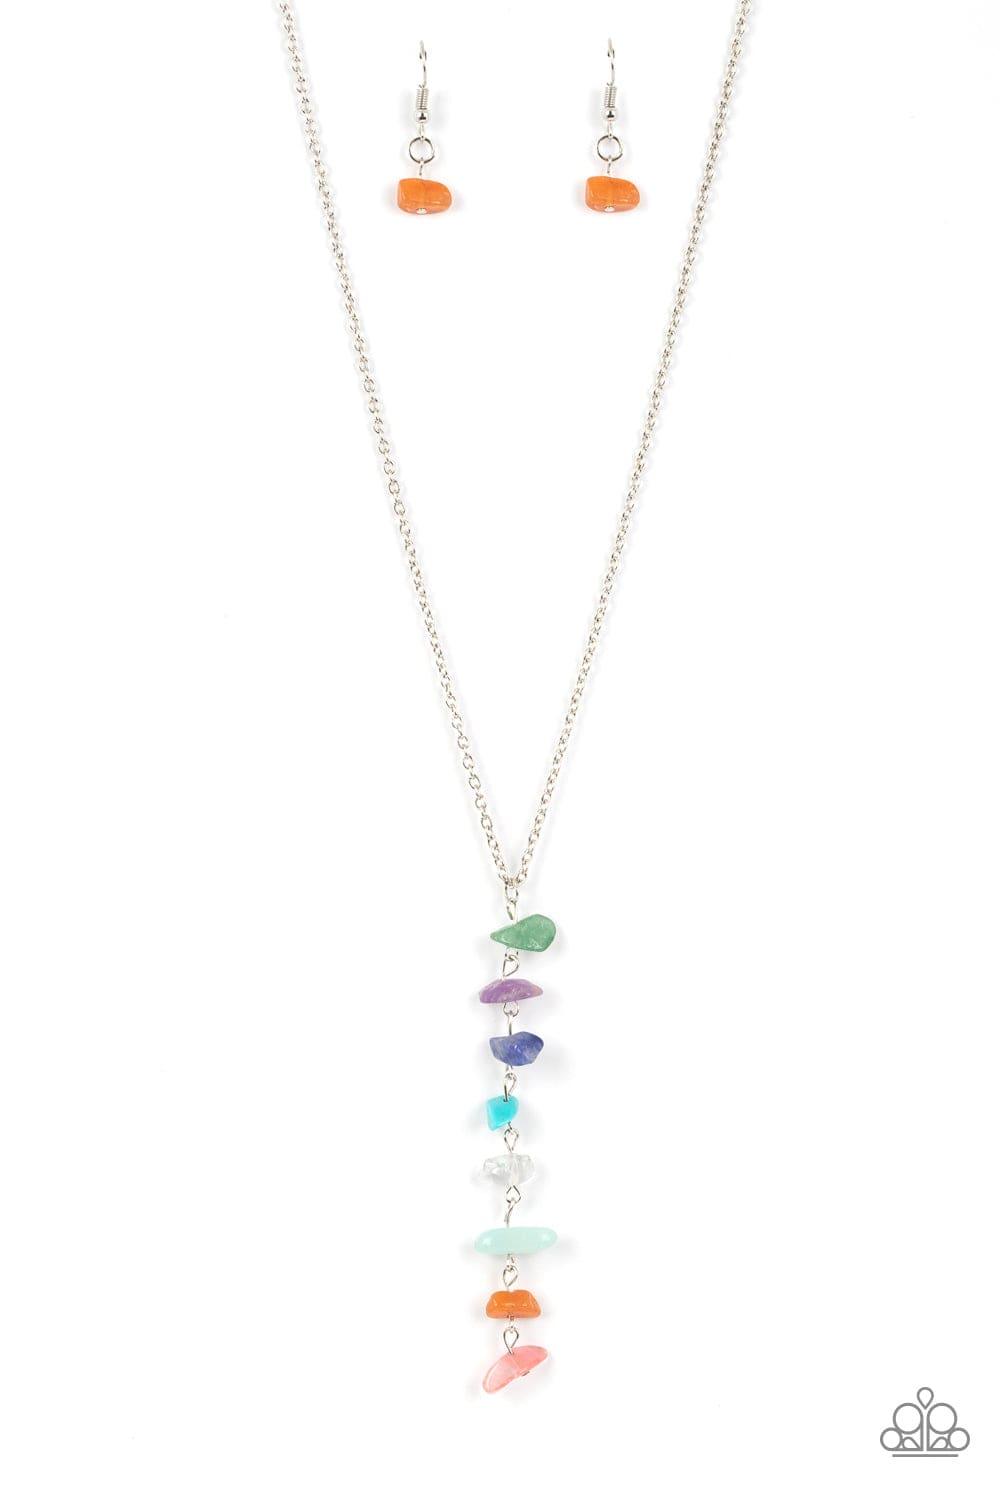 Paparazzi Accessories - Tranquil Tidings - Multicolor Necklace - Bling by JessieK